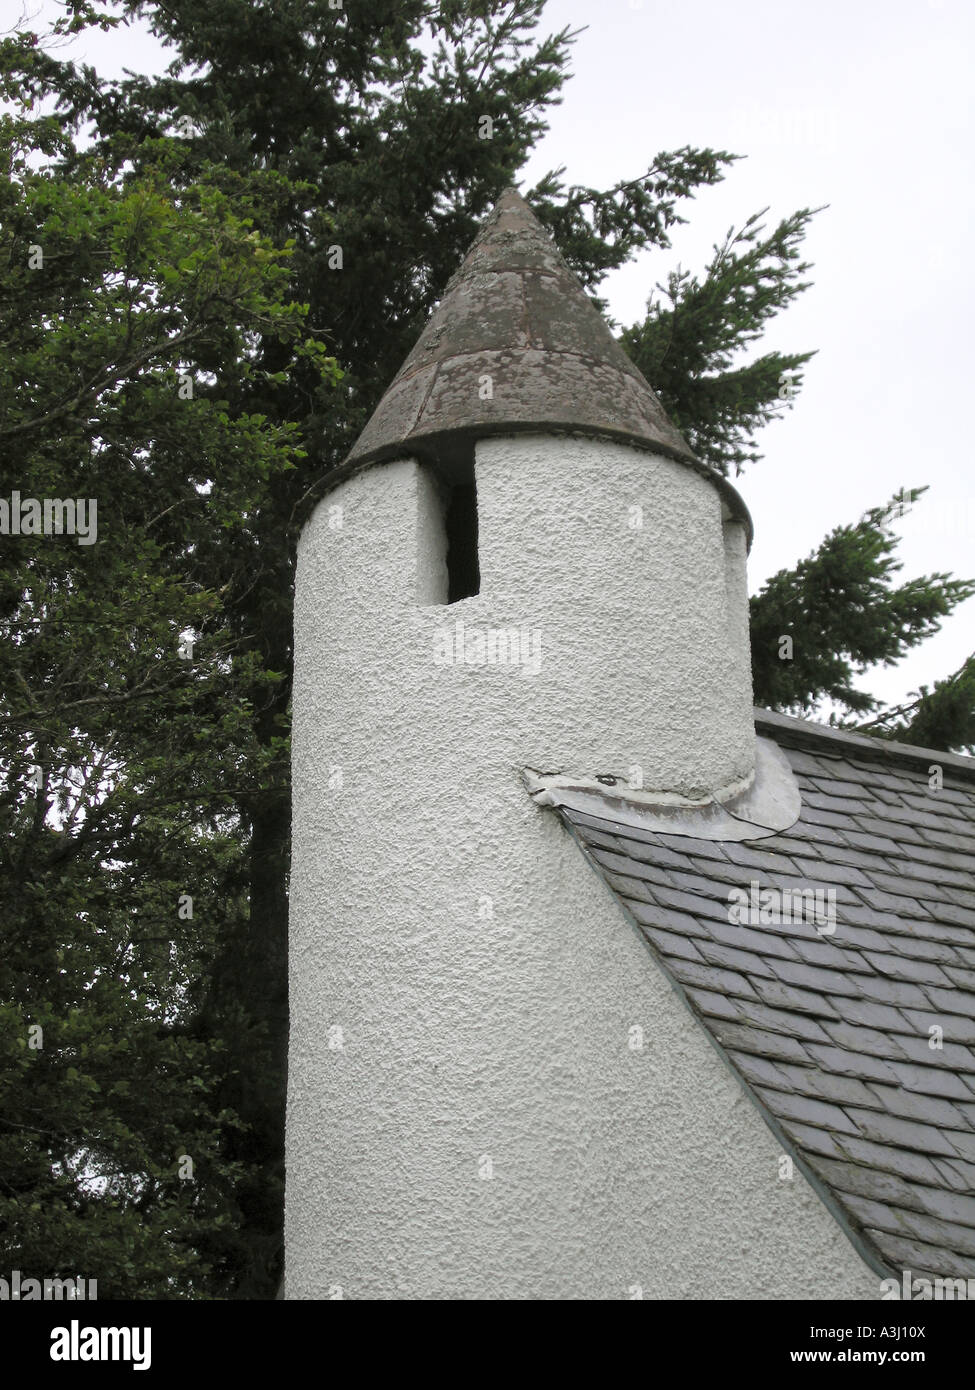 Tower steeple detail on old Scots church Stock Photo